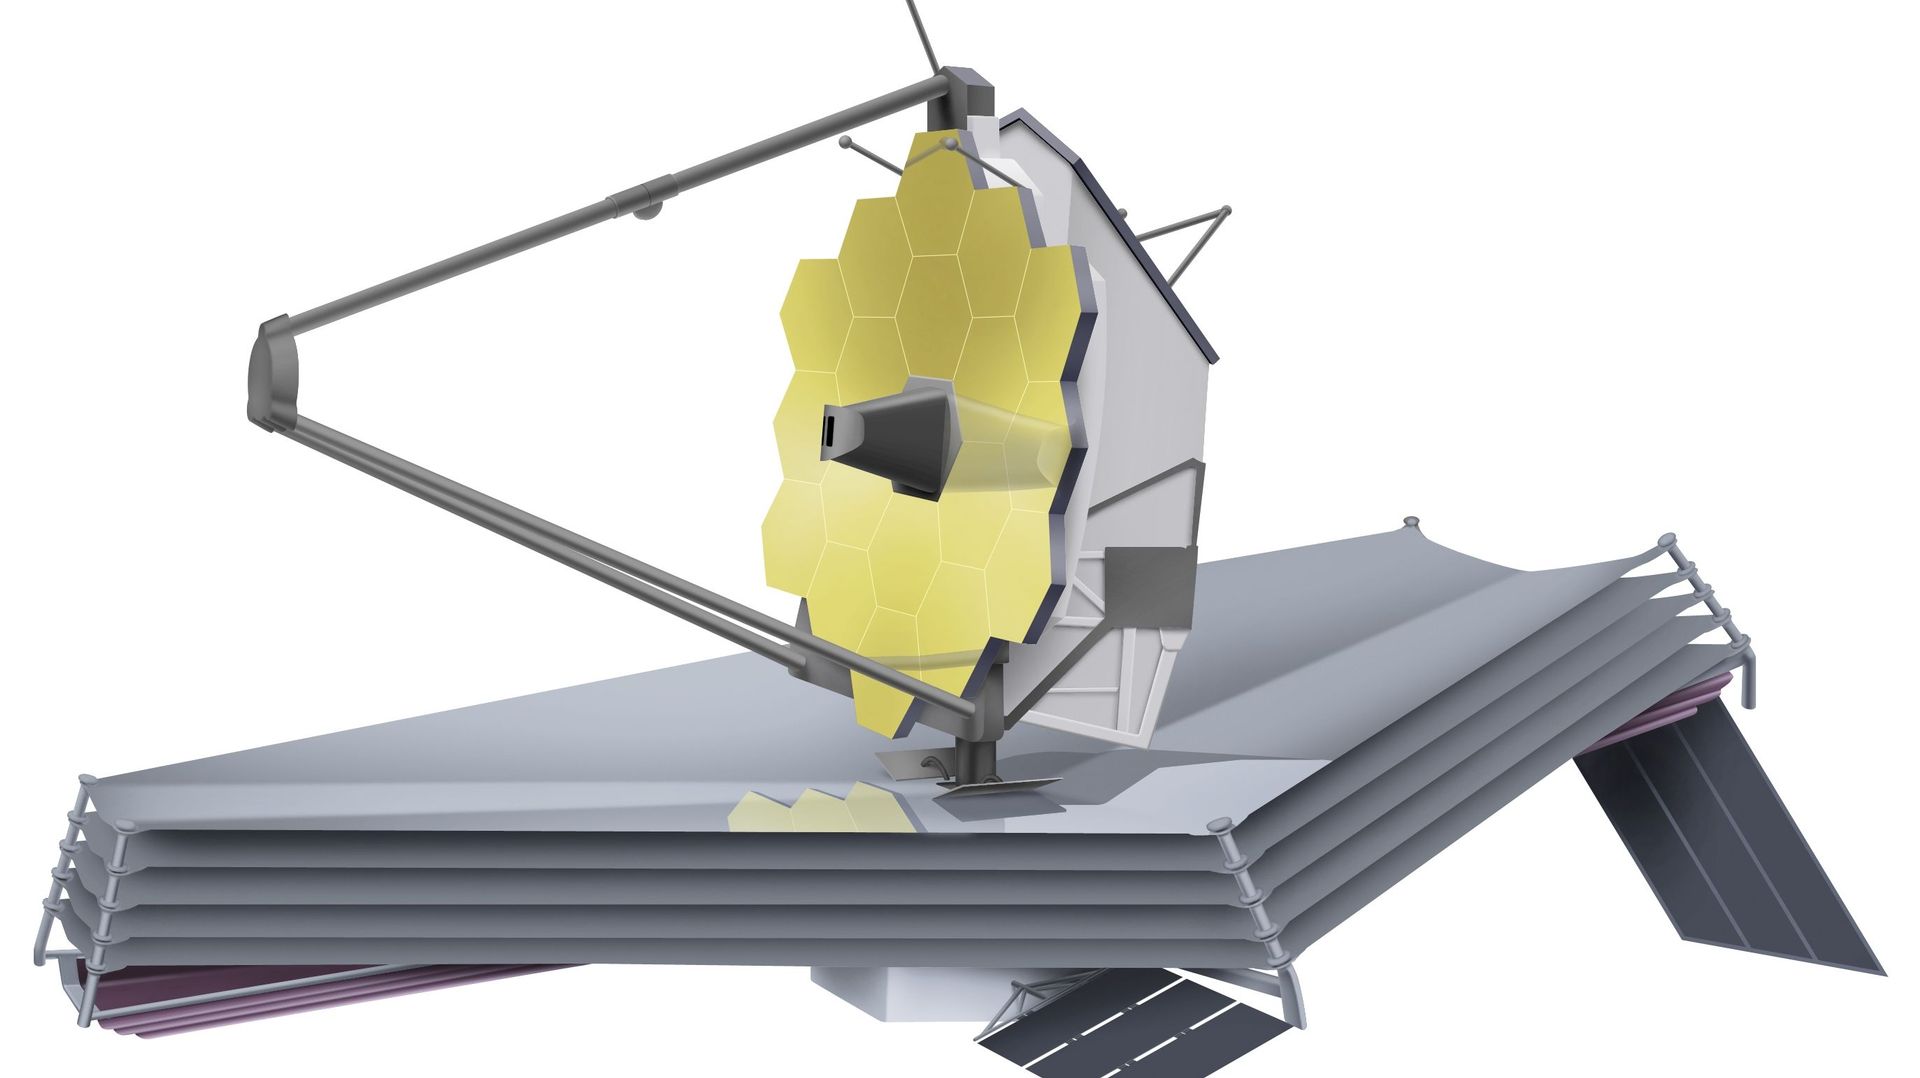 James Webb Space Telescope, Large infrared space telescope